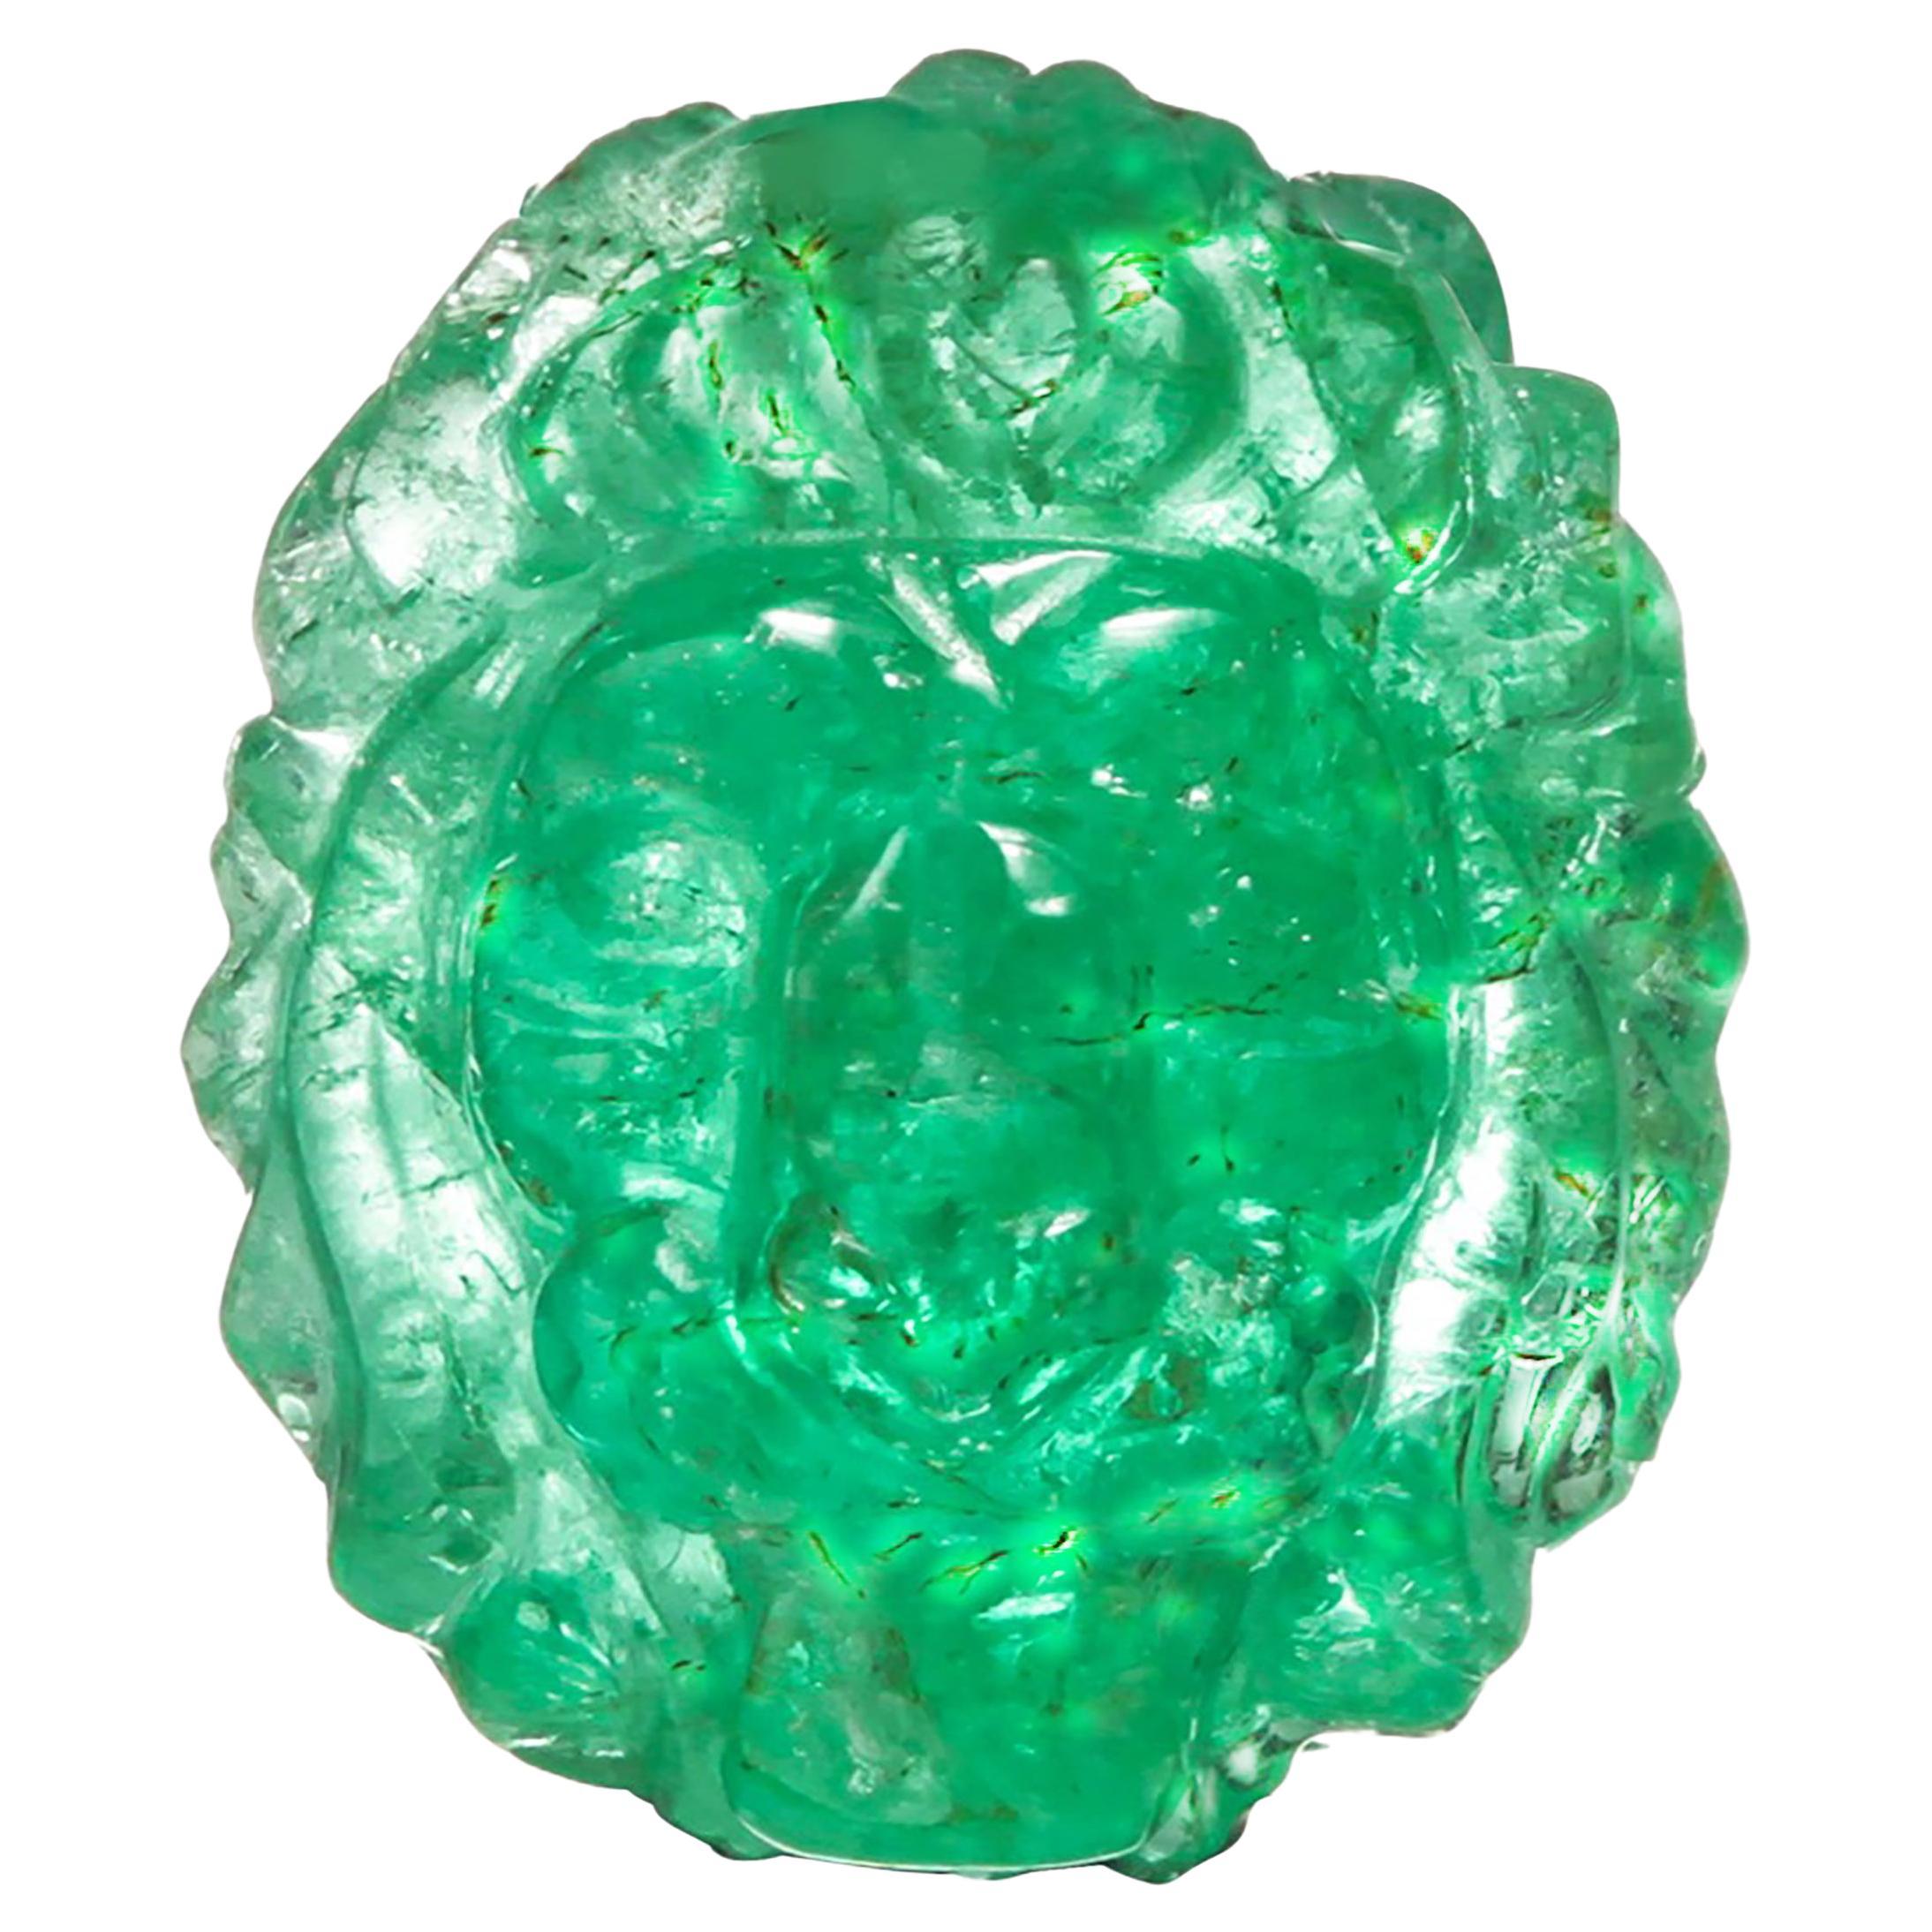 GIA Certified Carved Colombia Emerald Loose Stone Weighing 4.35 Carats